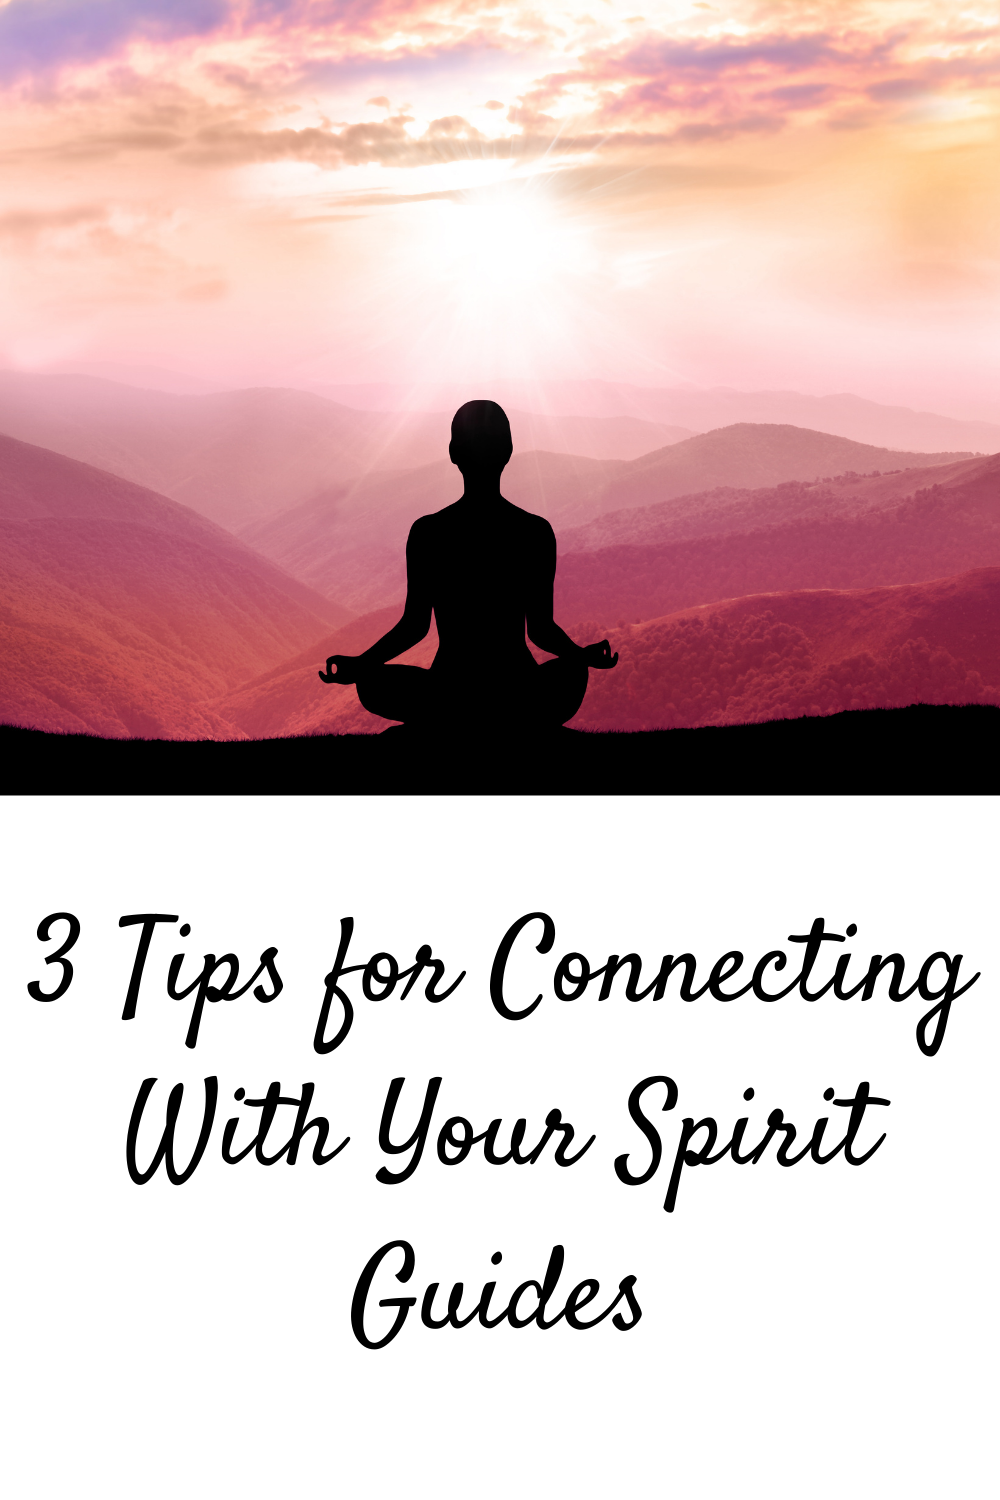 3 Tips for Connecting With Your Spirit Guides